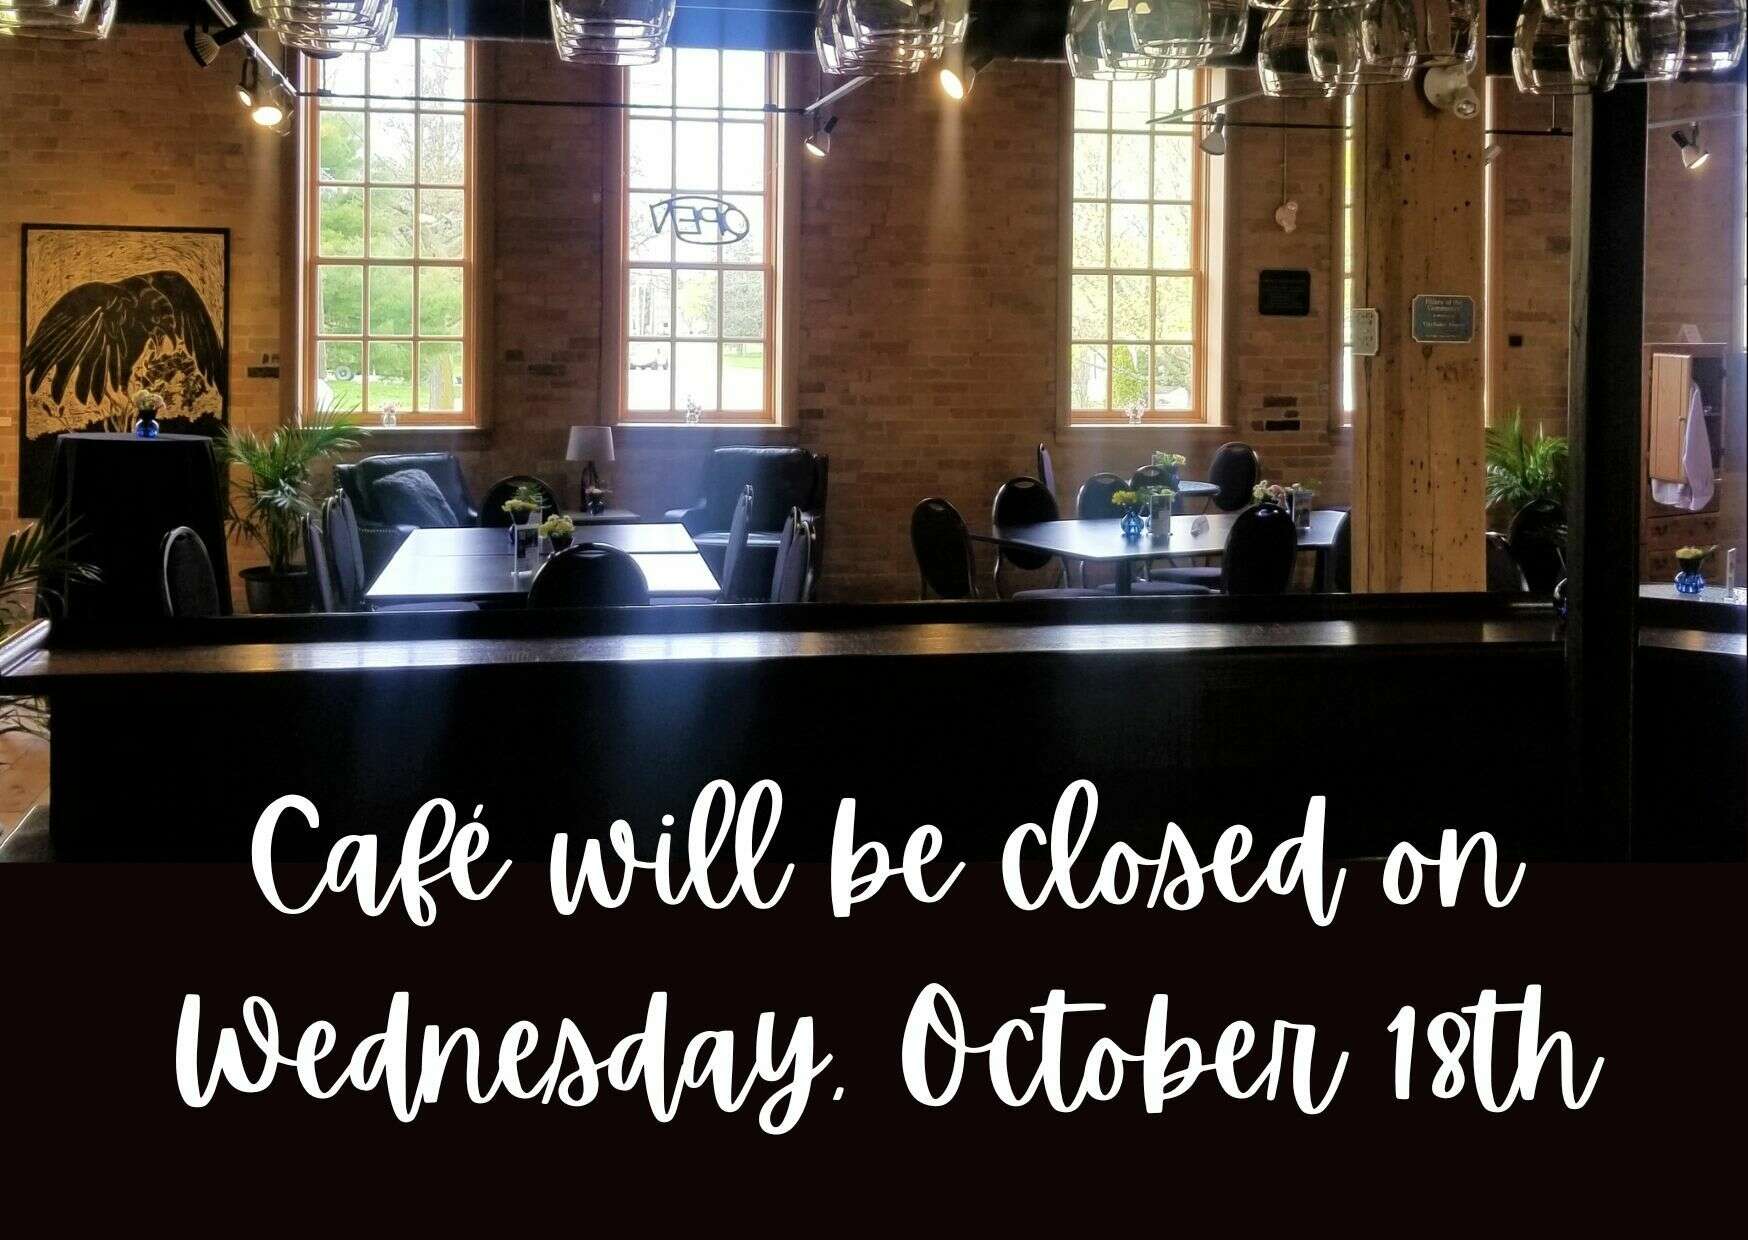 Cafe Closed Oct 18th